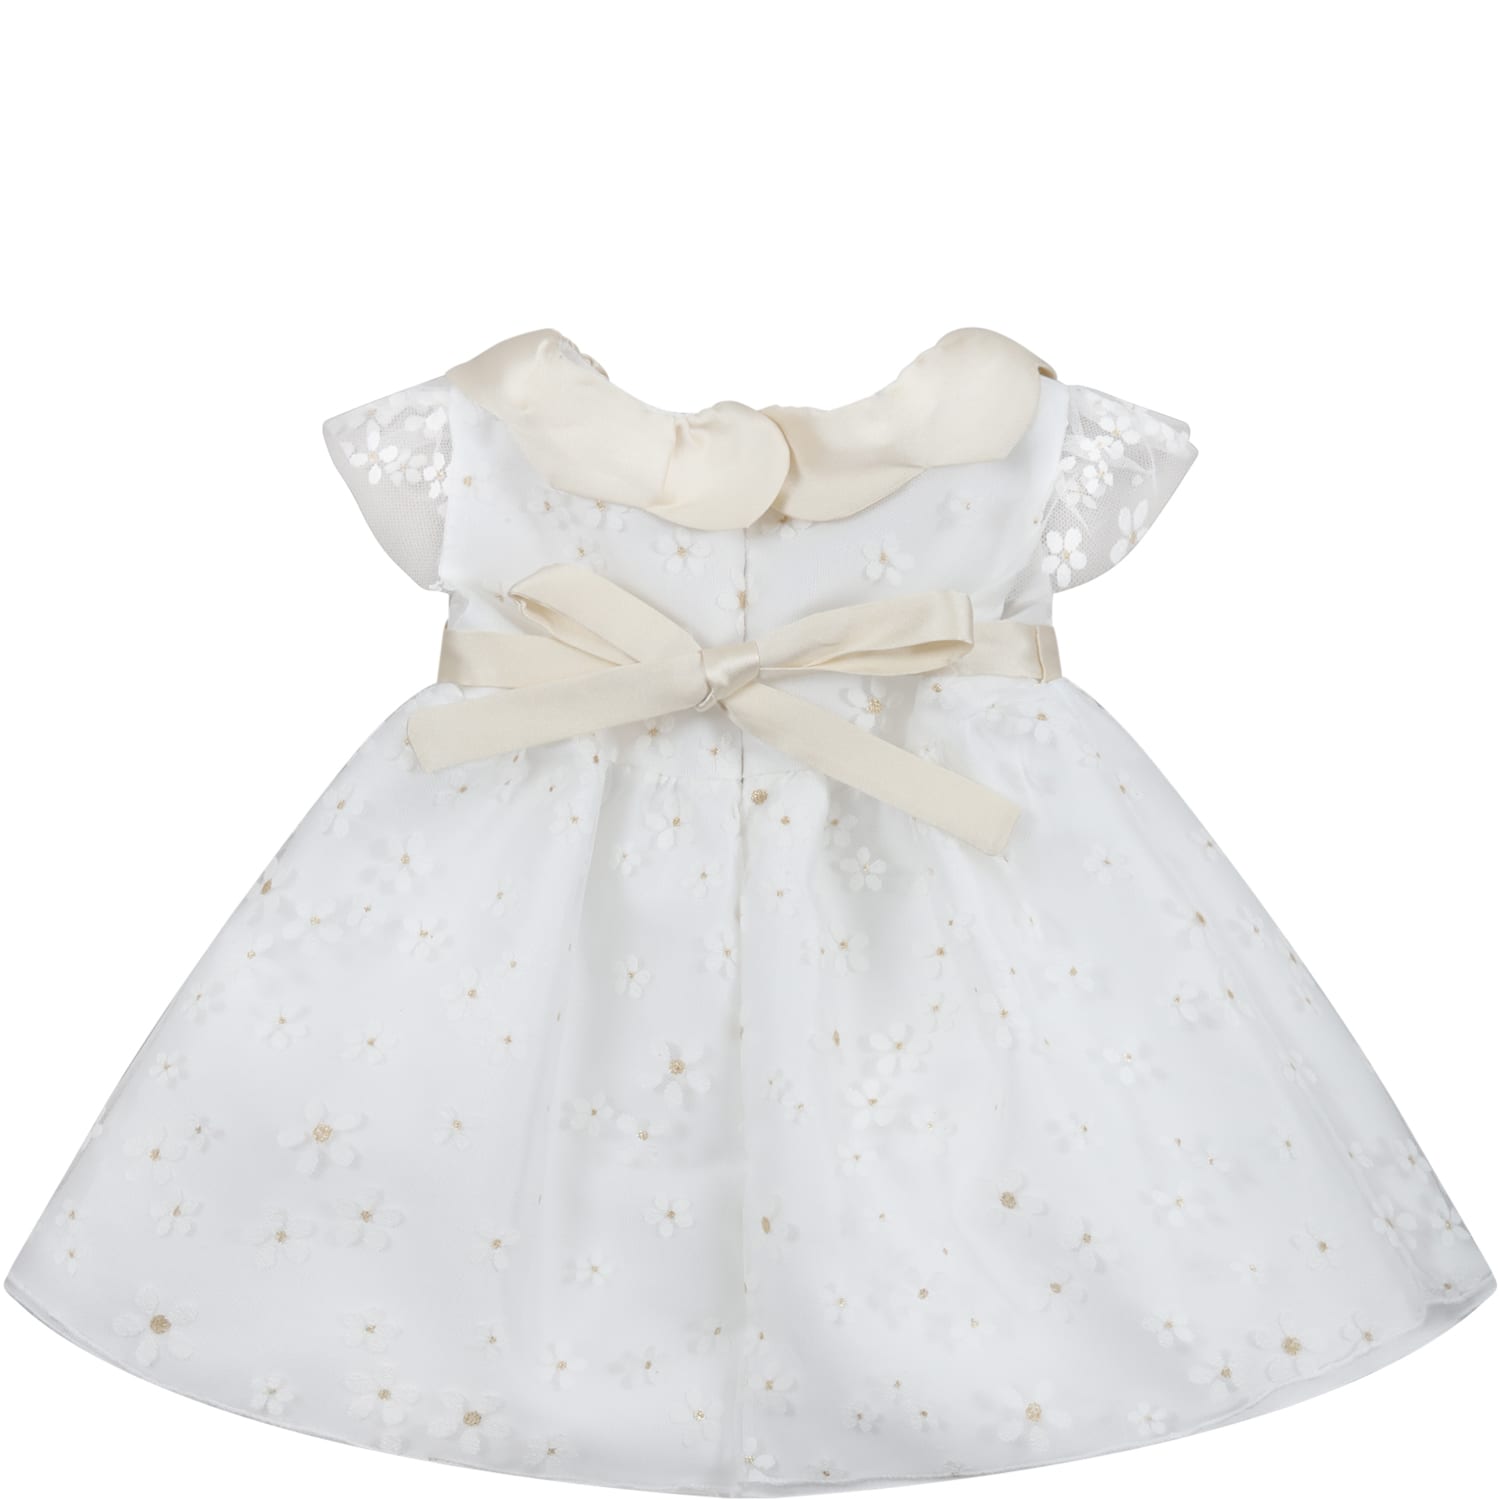 Shop La Stupenderia White Sleeveless Dress For Baby Girl With Daisies